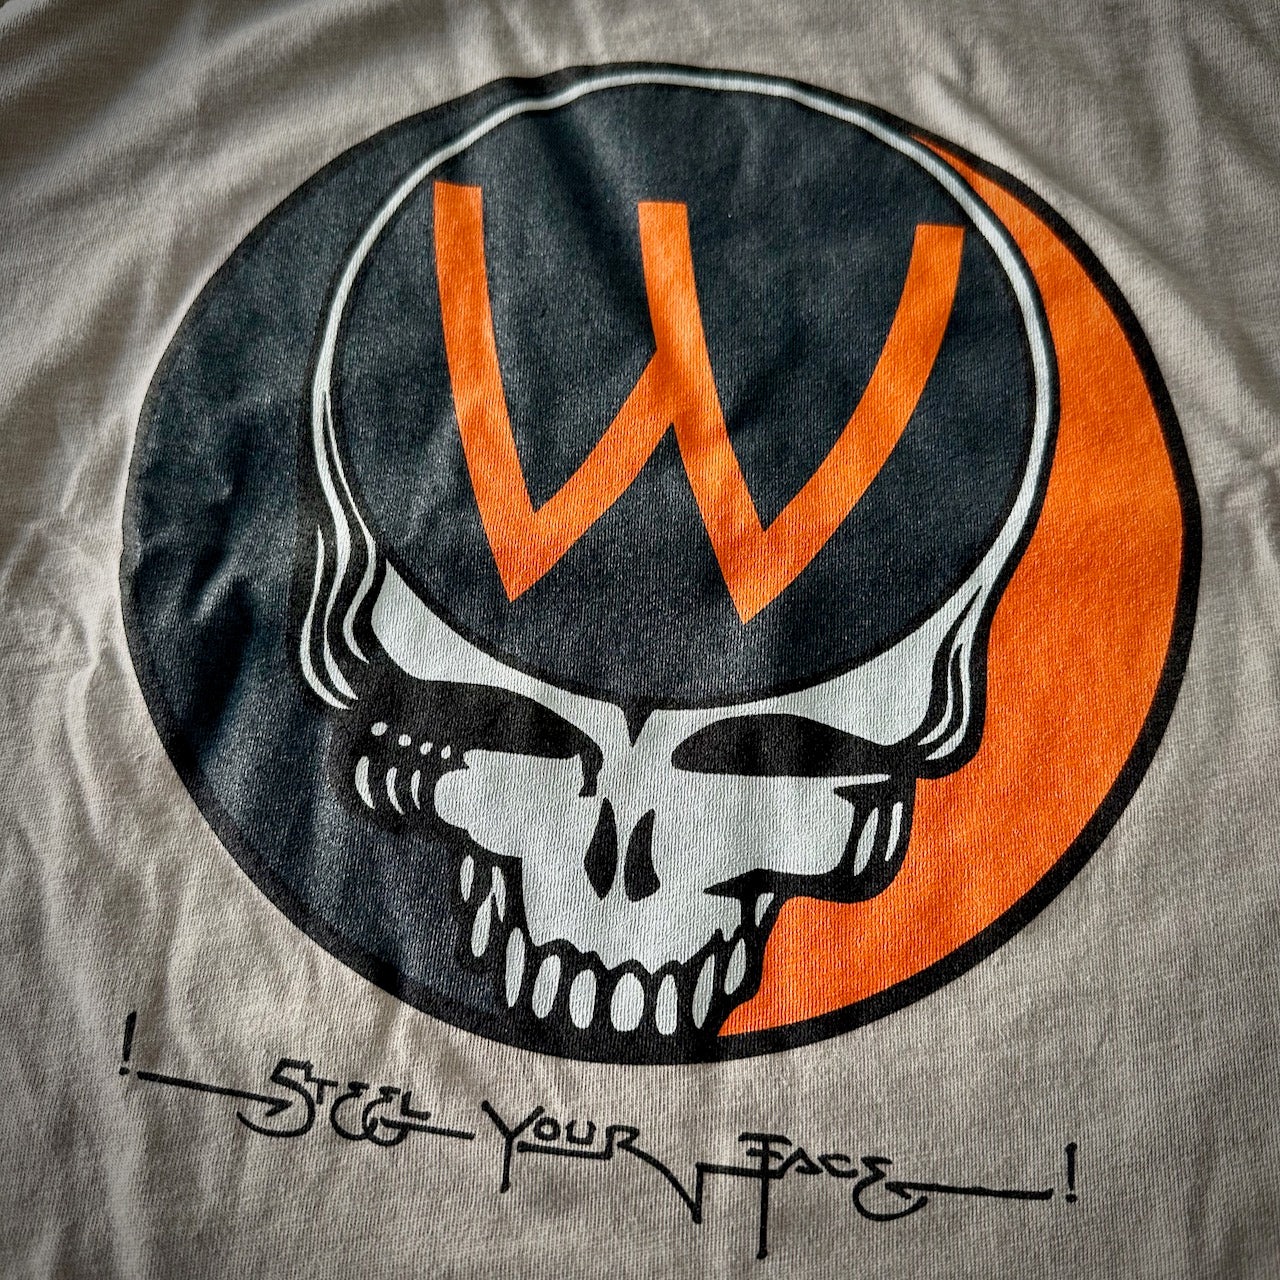 STEEL Your Face Tee - Heather Stone - Limited Small Batch